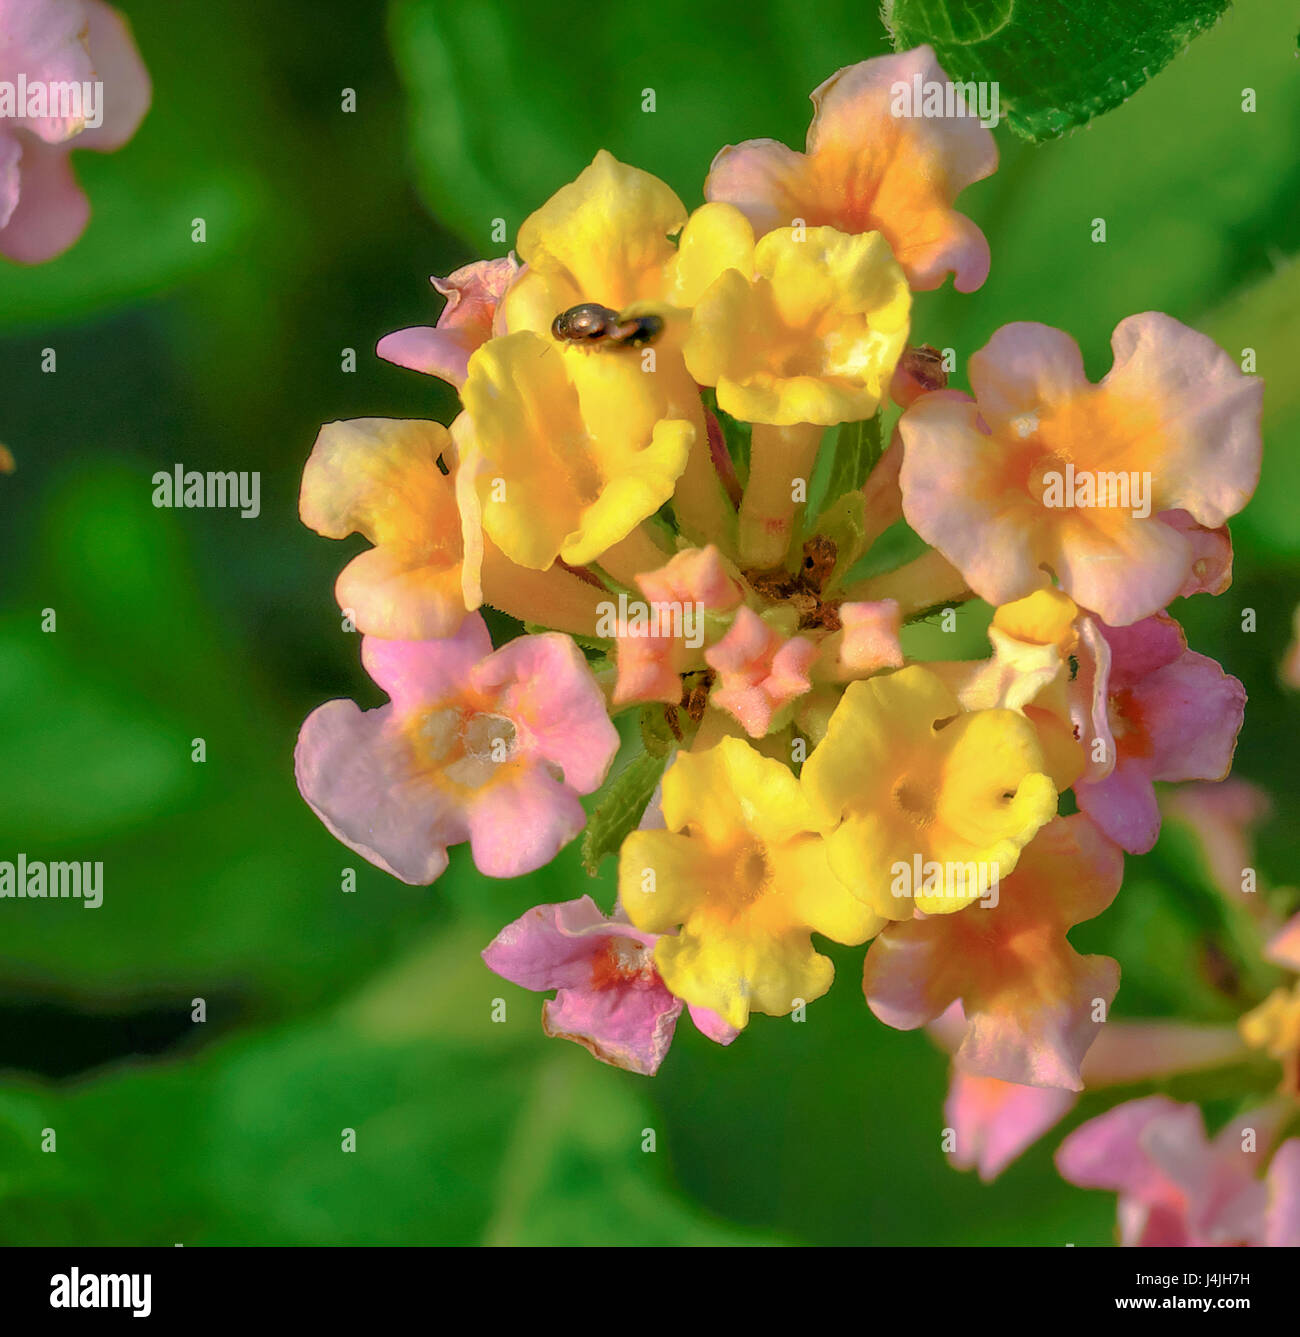 Cluster of yellow and pink Lanatana flowers Stock Photo